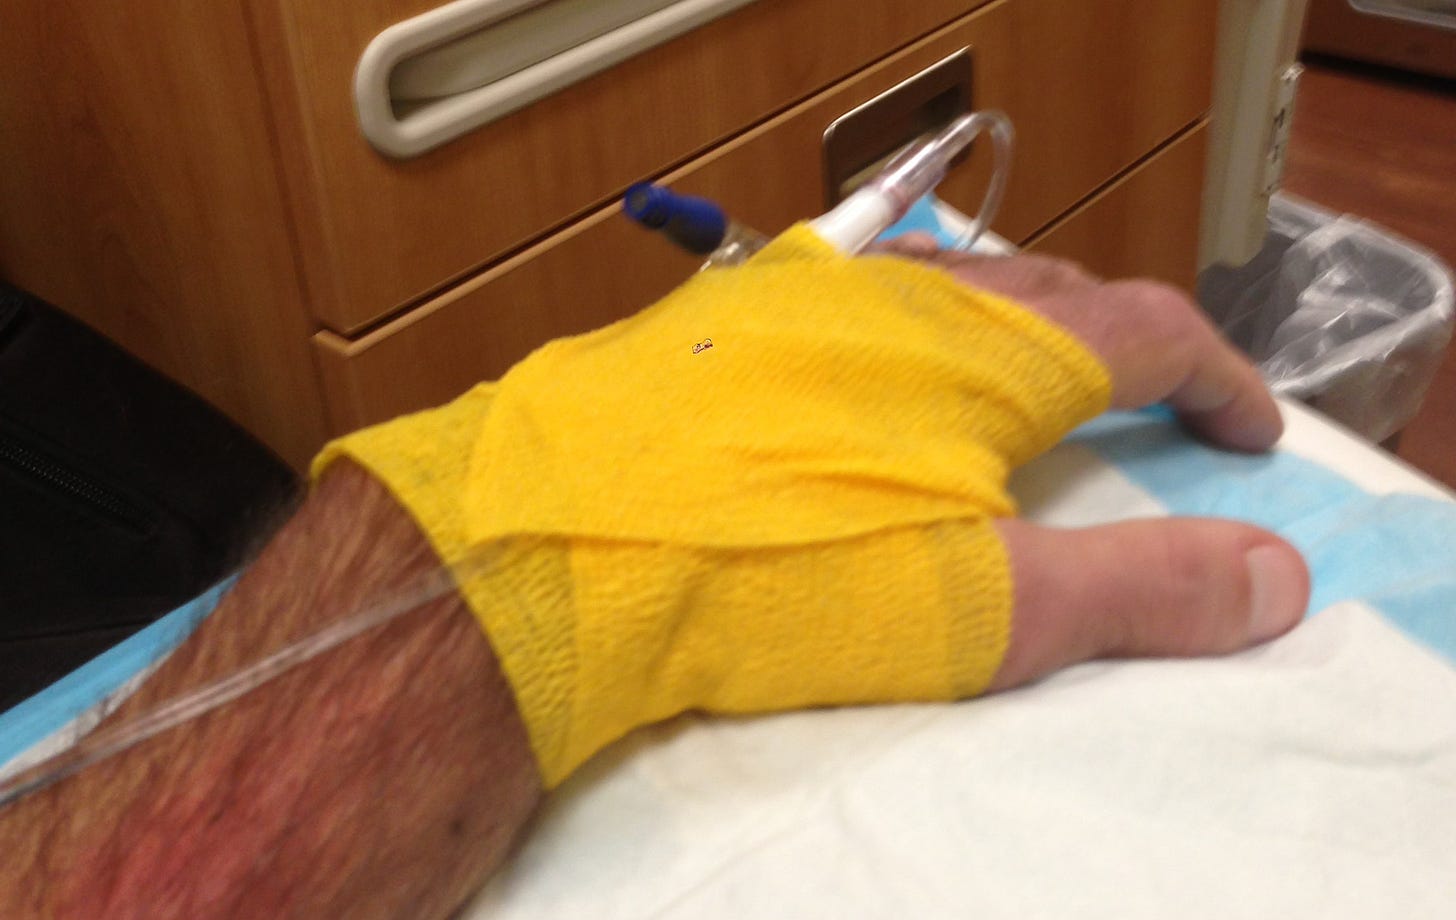 A bandaged hand with an IV attached being administered IVIG. The bandage is yellow.